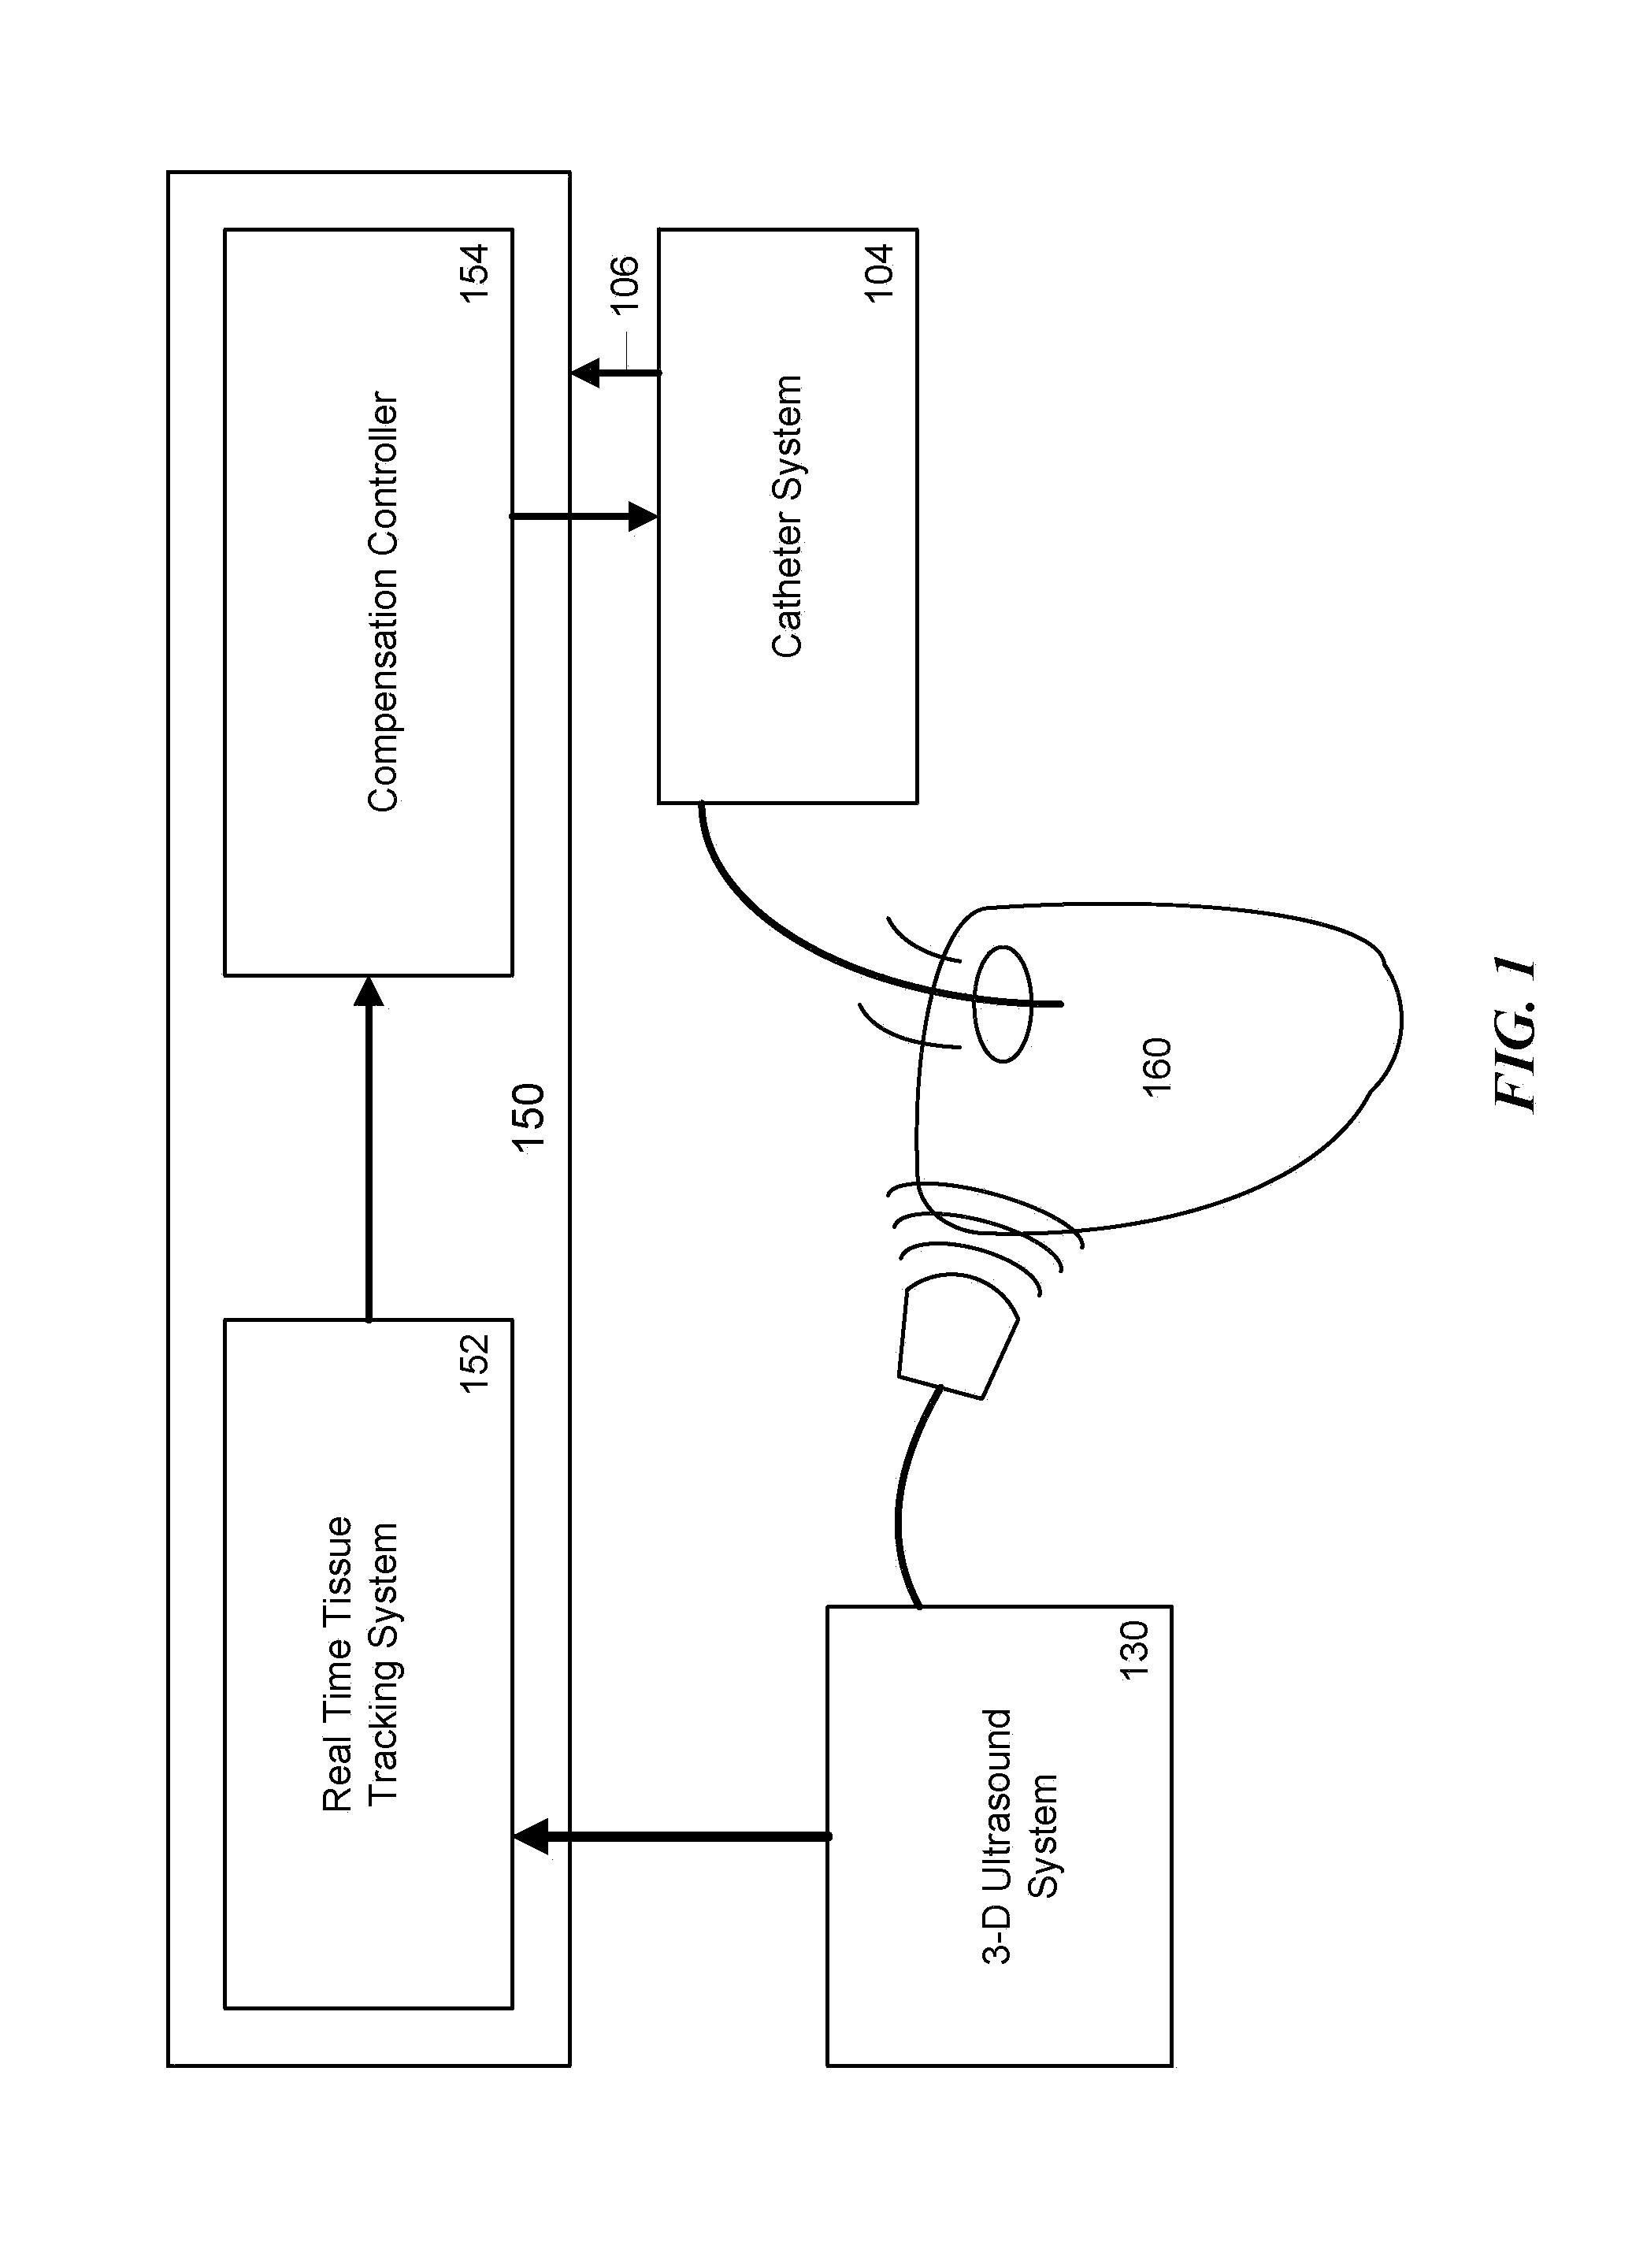 Motion compensating catheter device